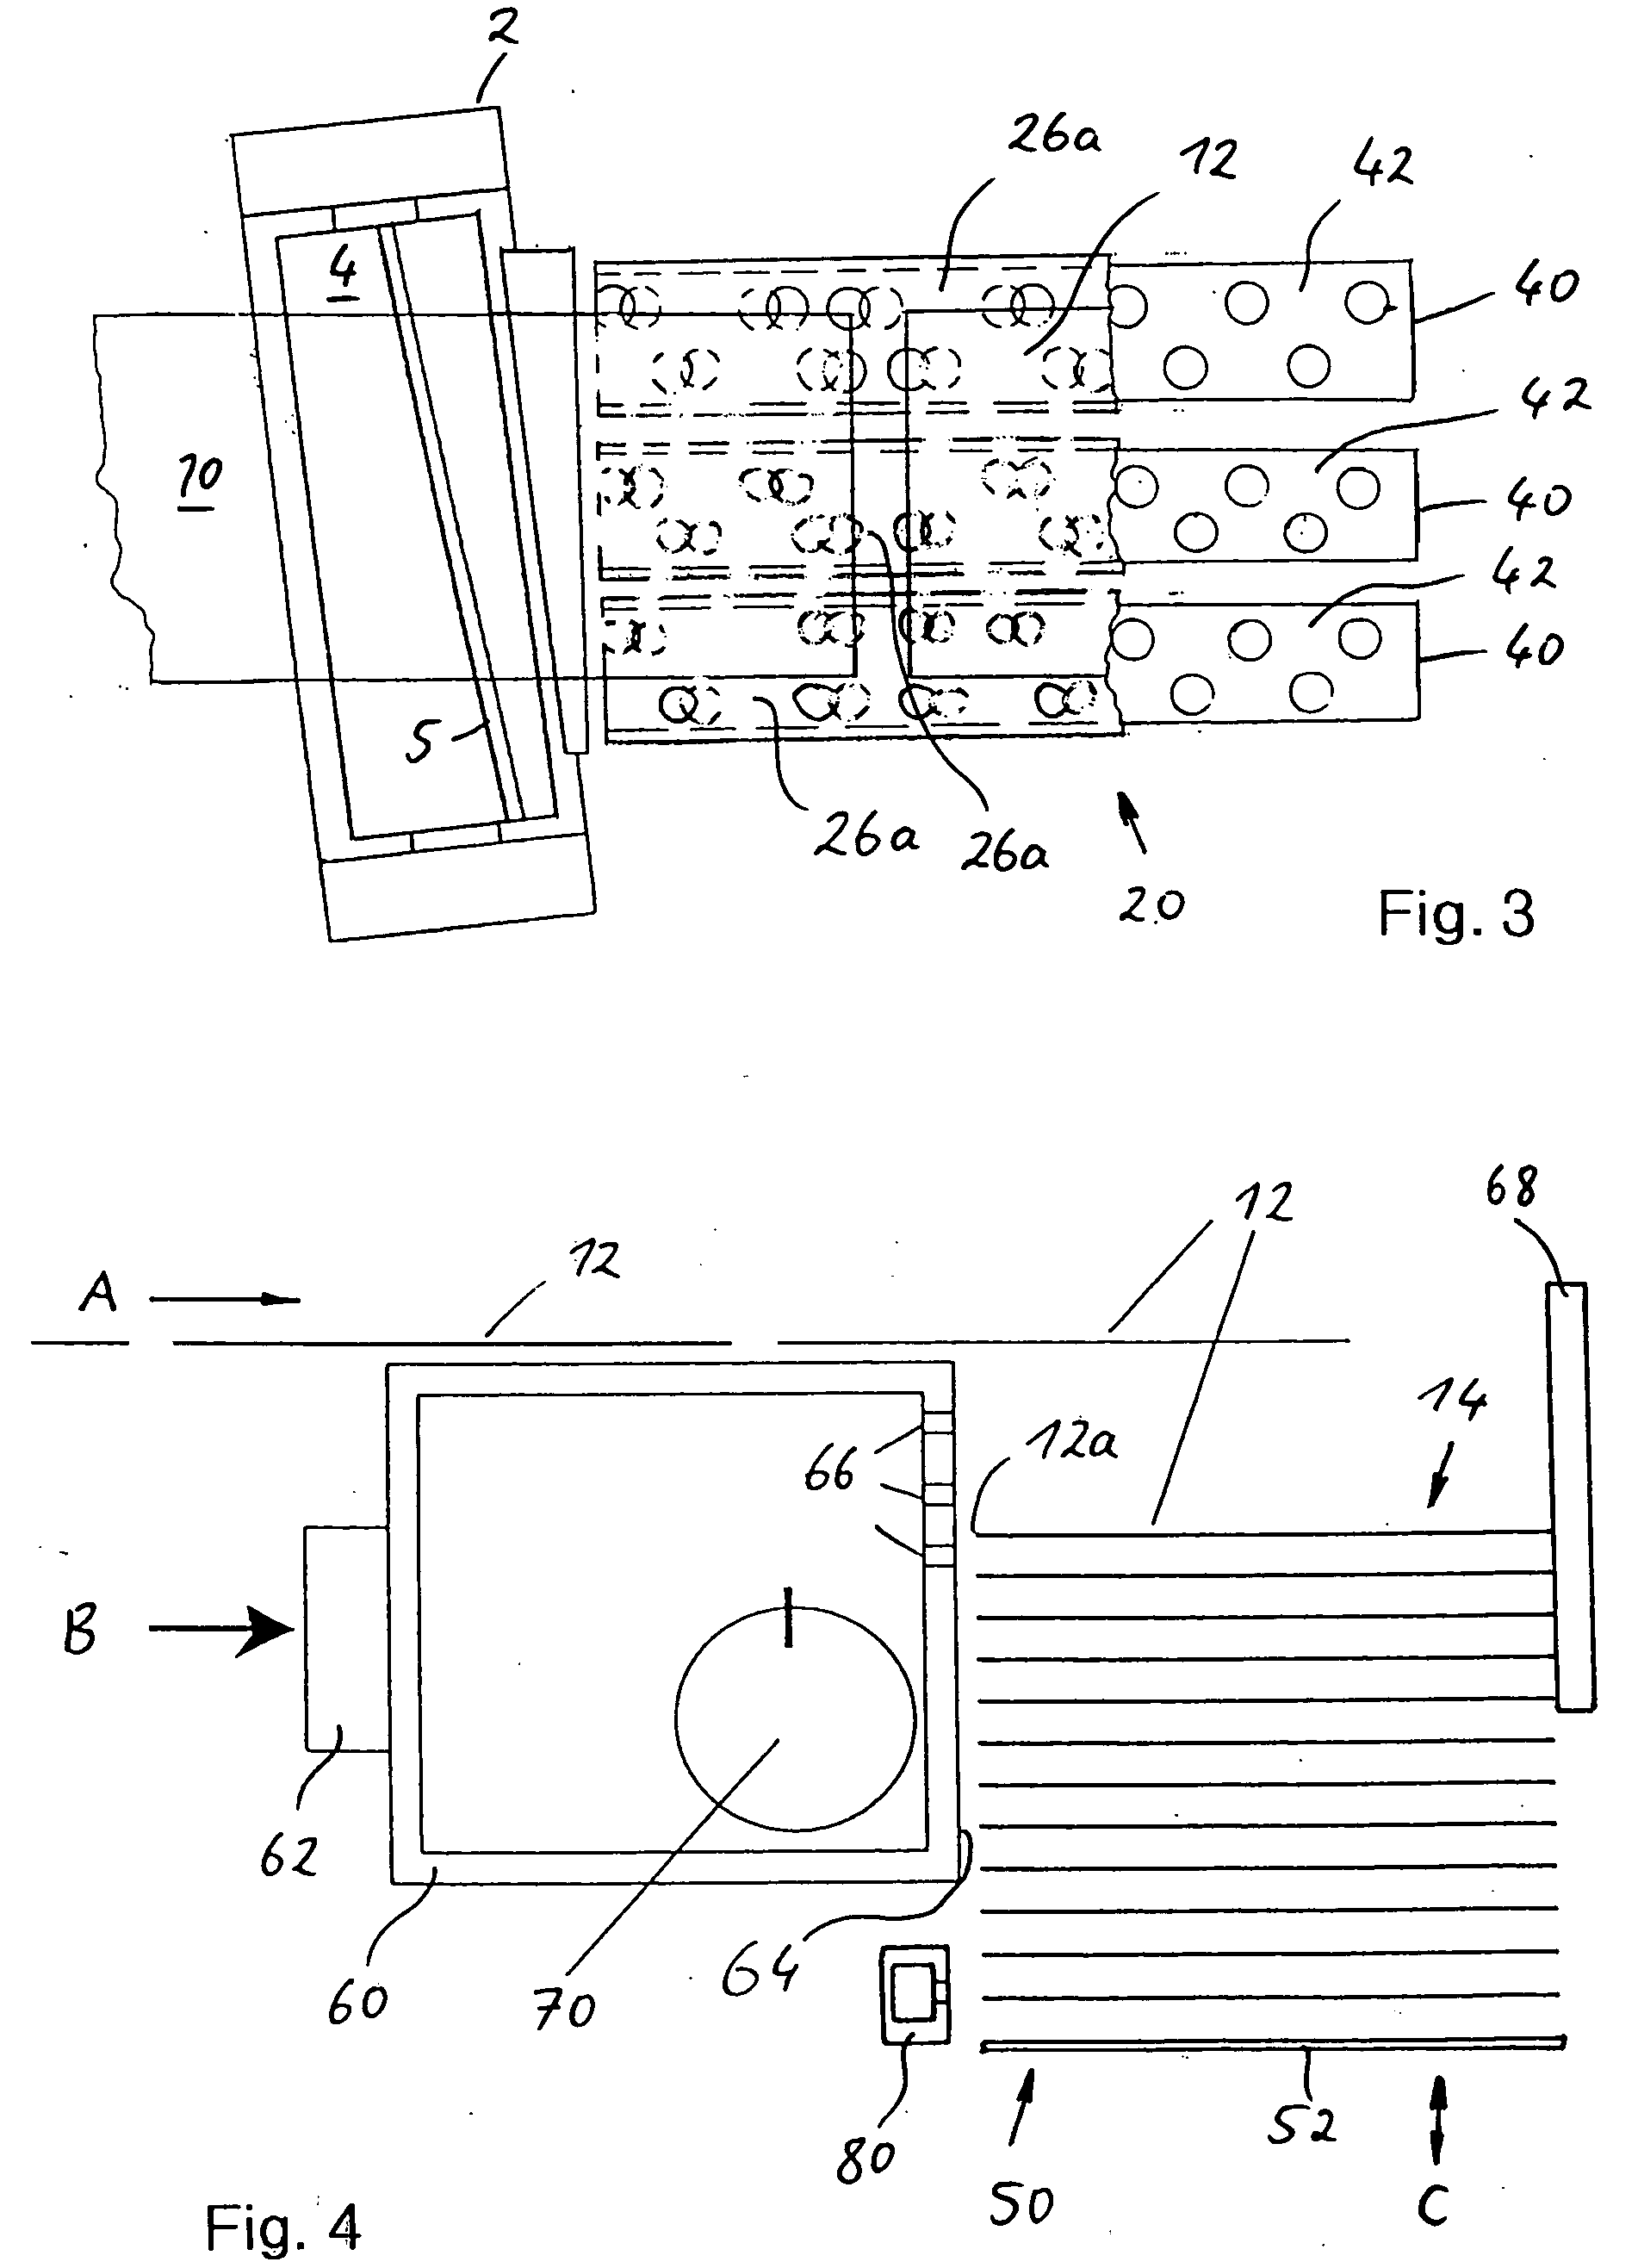 Apparatus for treating elongated multi-layer webs of electrostatically chargeable material